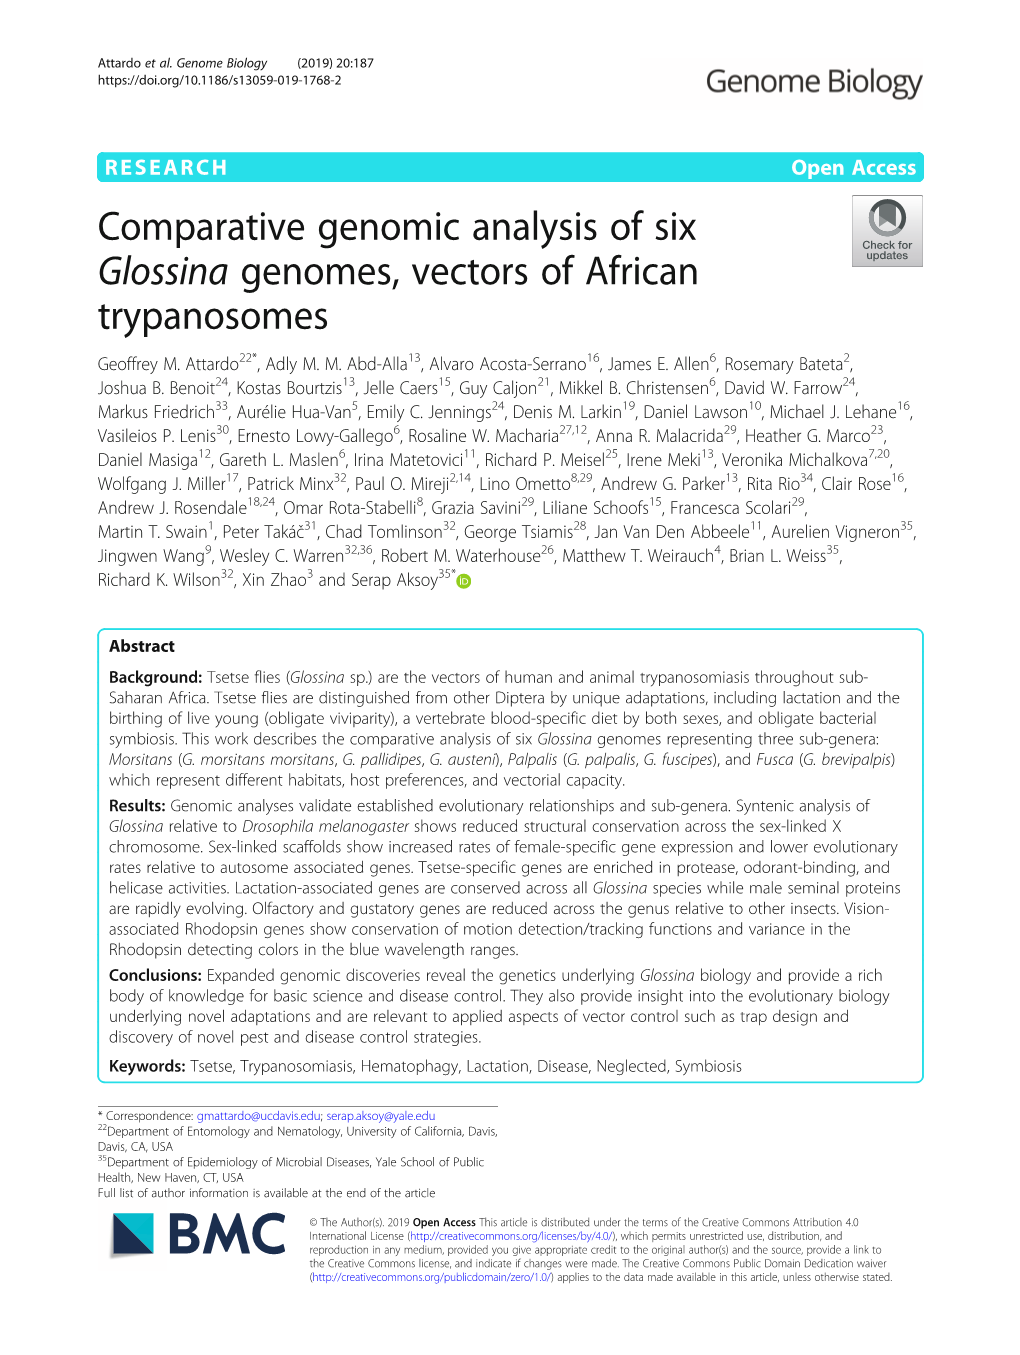 Comparative Genomic Analysis of Six Glossina Genomes, Vectors of African Trypanosomes Geoffrey M